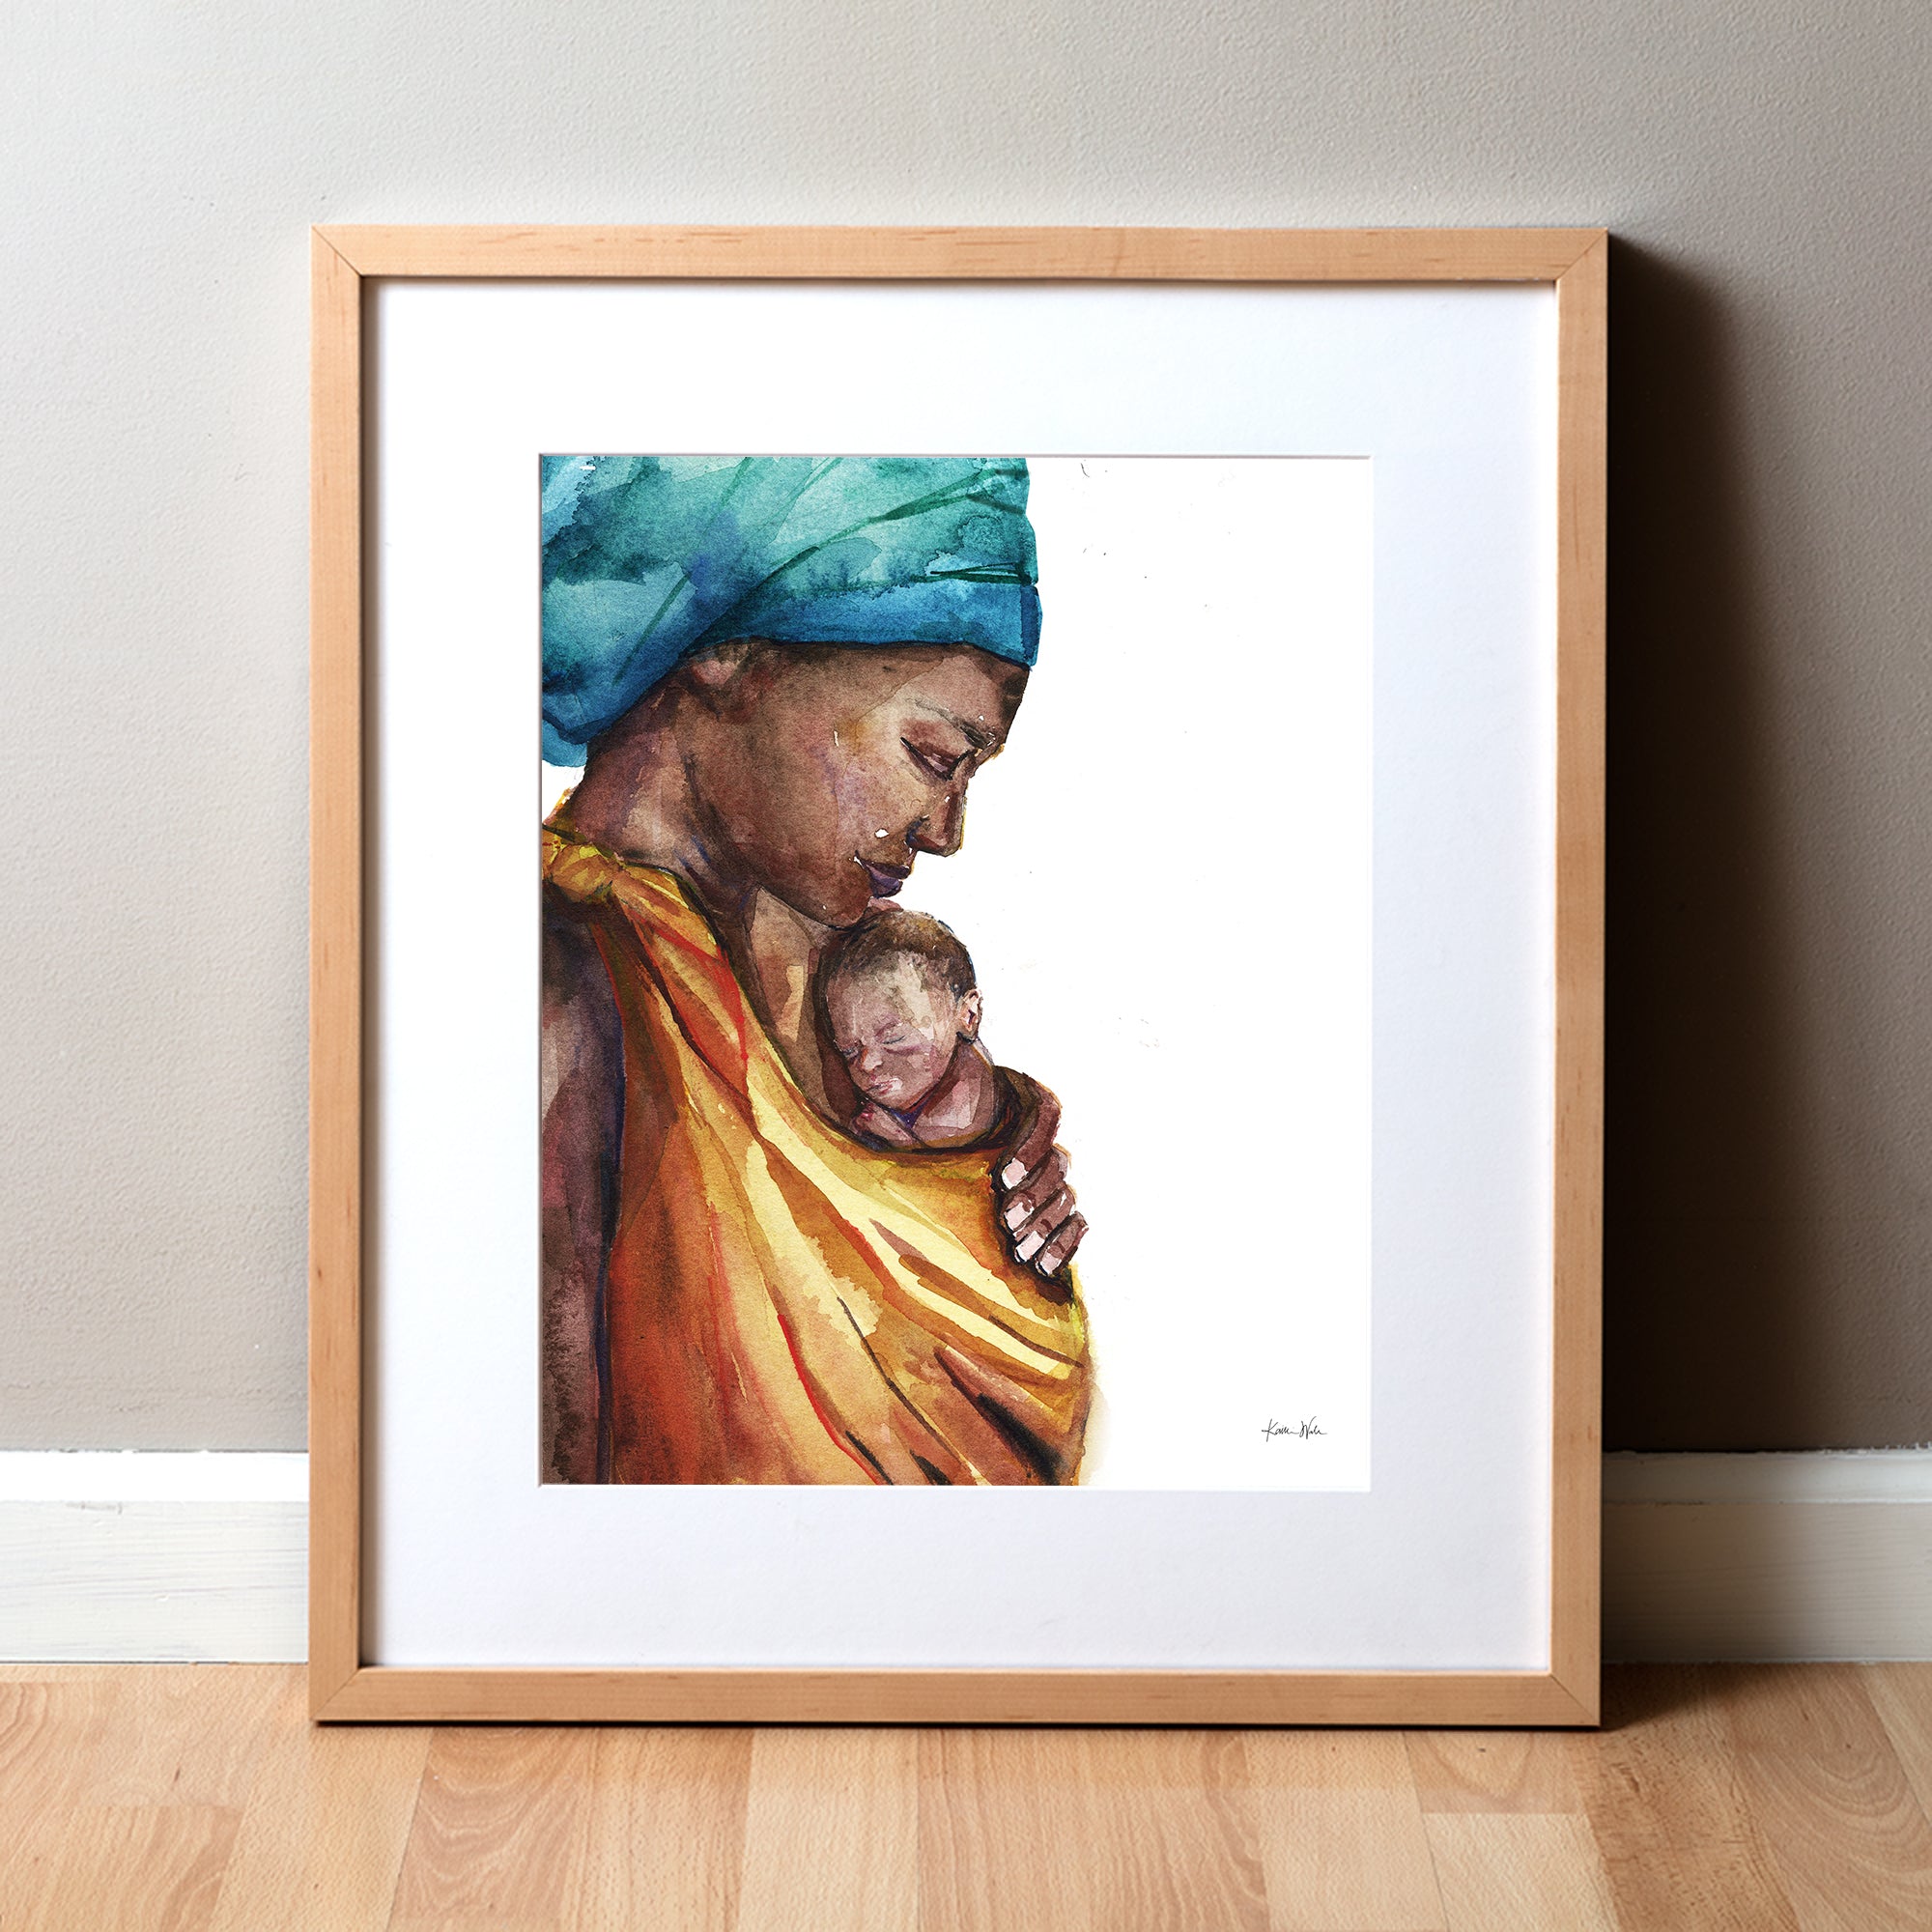 Framed watercolor painting of an african woman holding her premature infant. She is wearing a teal head wrap and is wearing her child in an orange wrap.